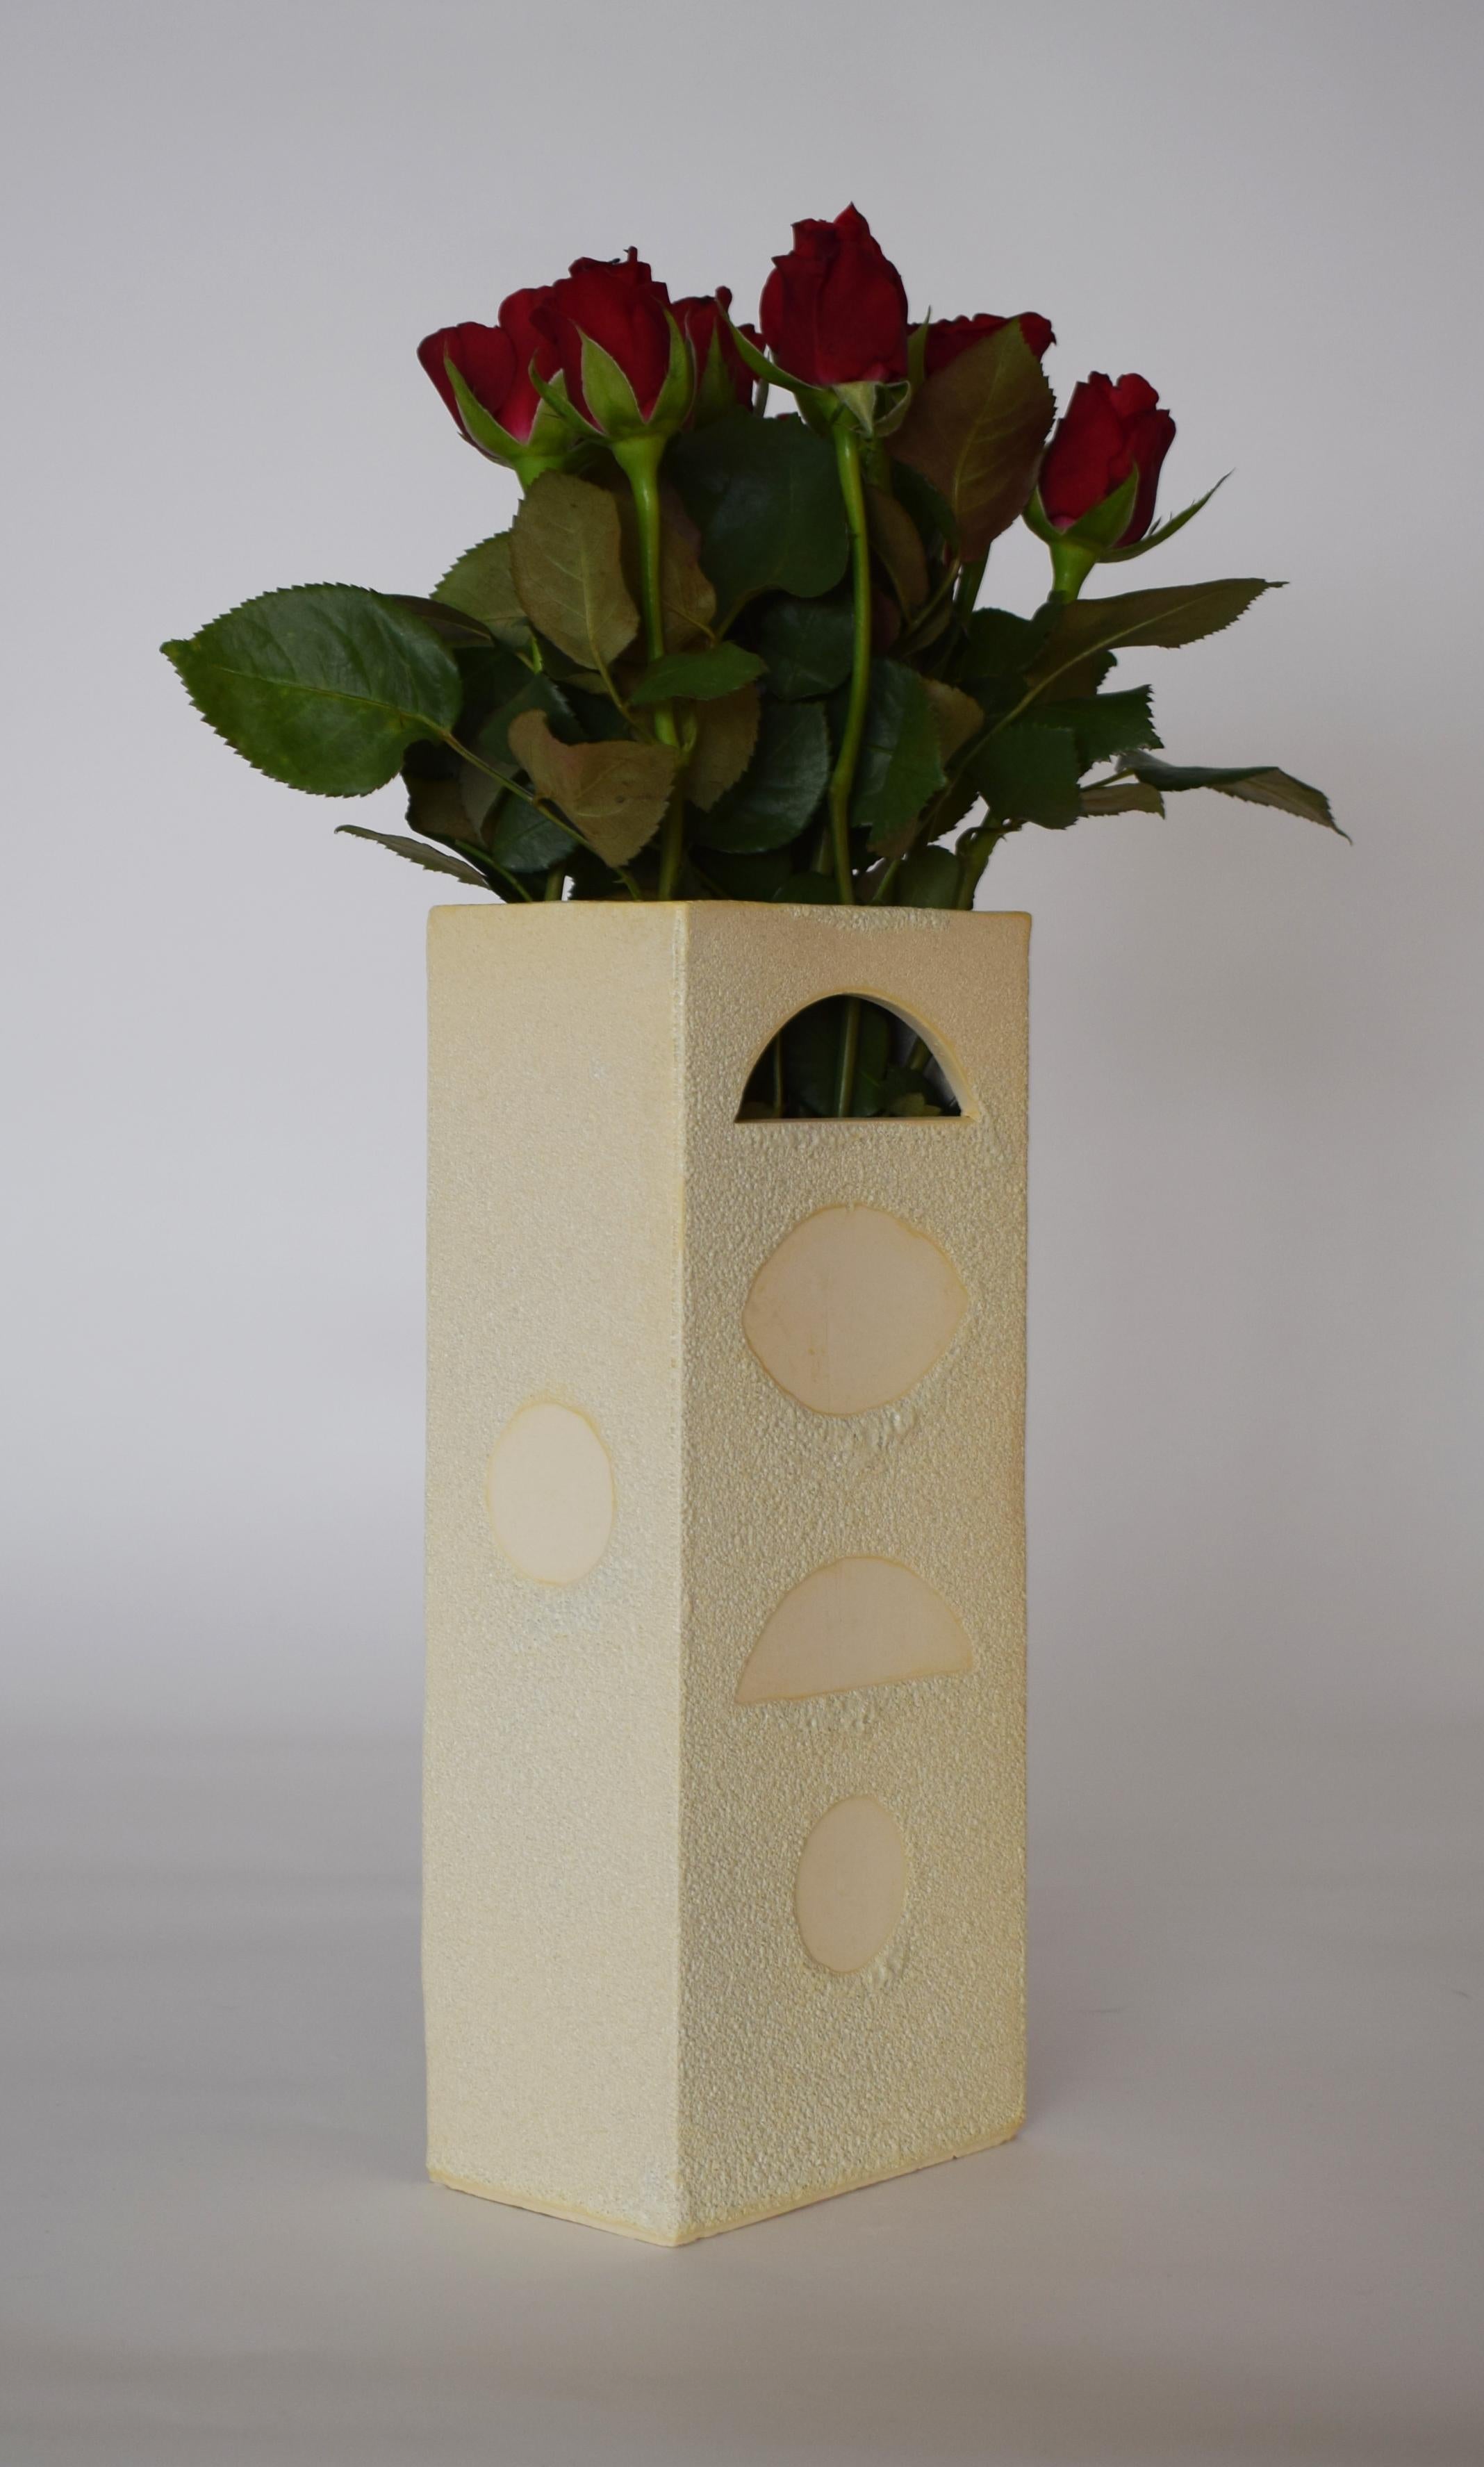 Modern Customizable Hand-crafted Ceramic Vase (Parliament B) by James Hicks For Sale